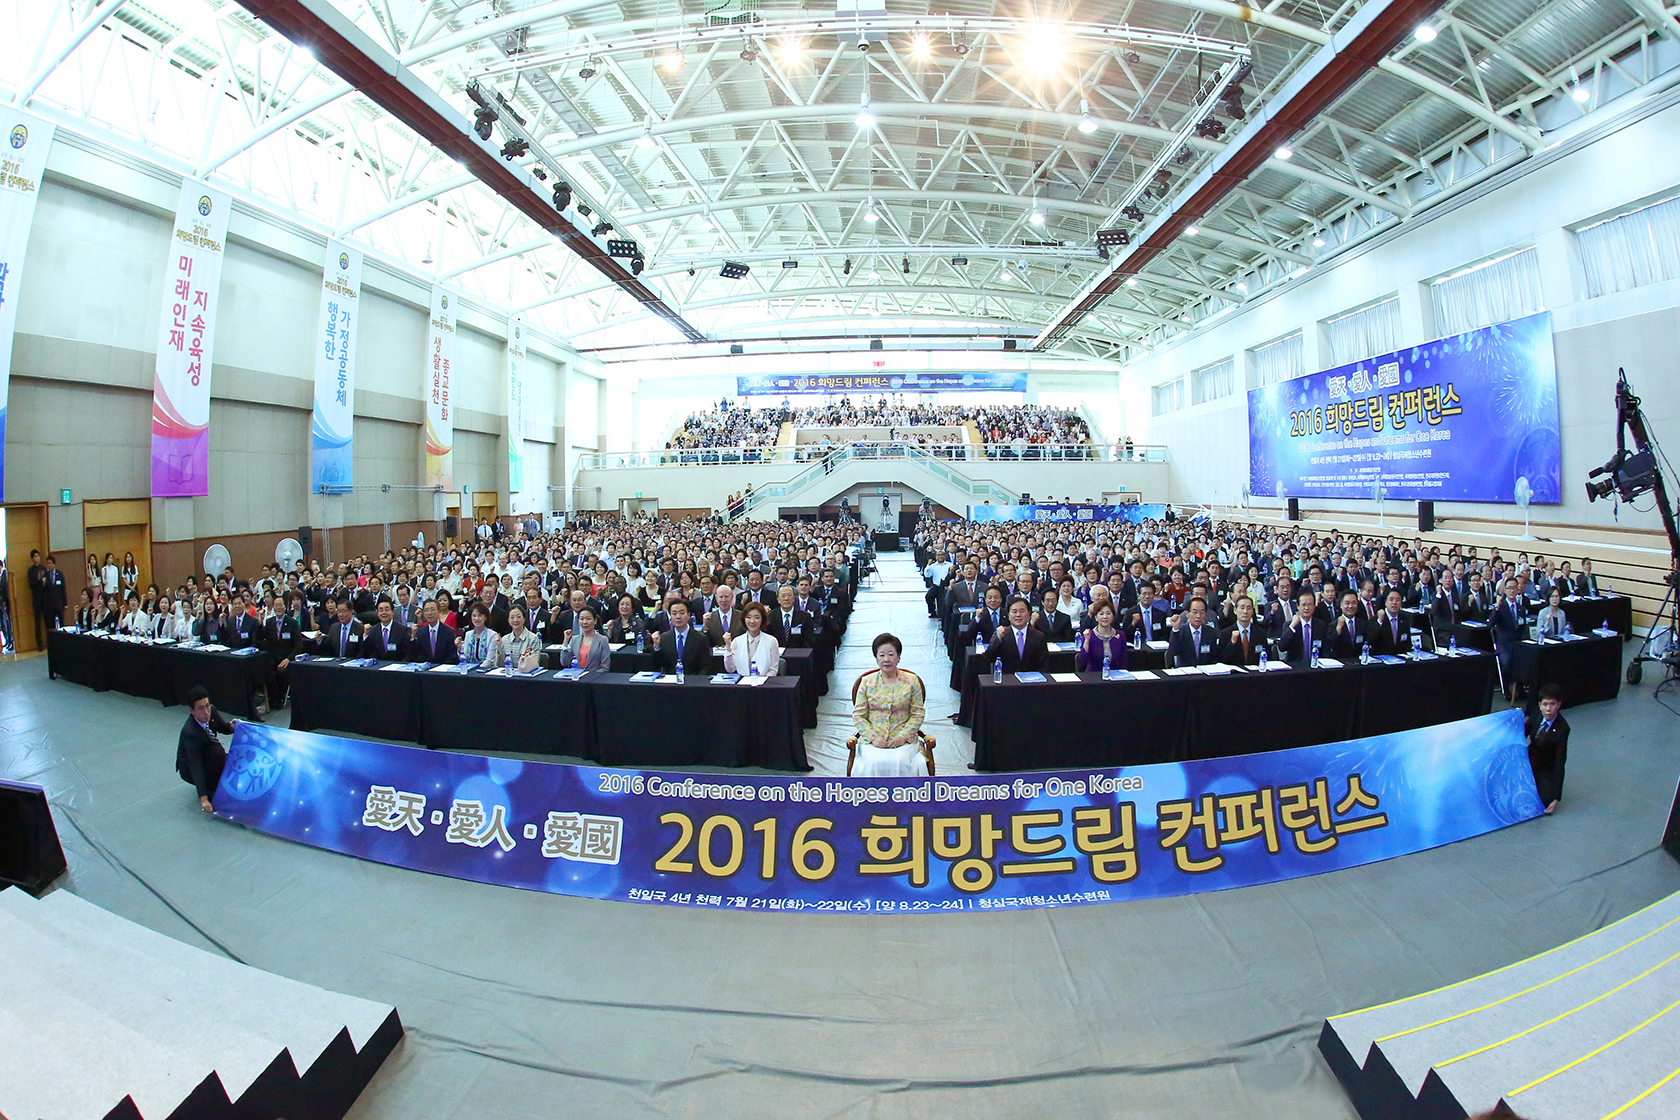 the Conference on the Hopes and Dreams of One Korea (August 23-4, Cheongshim International Youth Training Center)